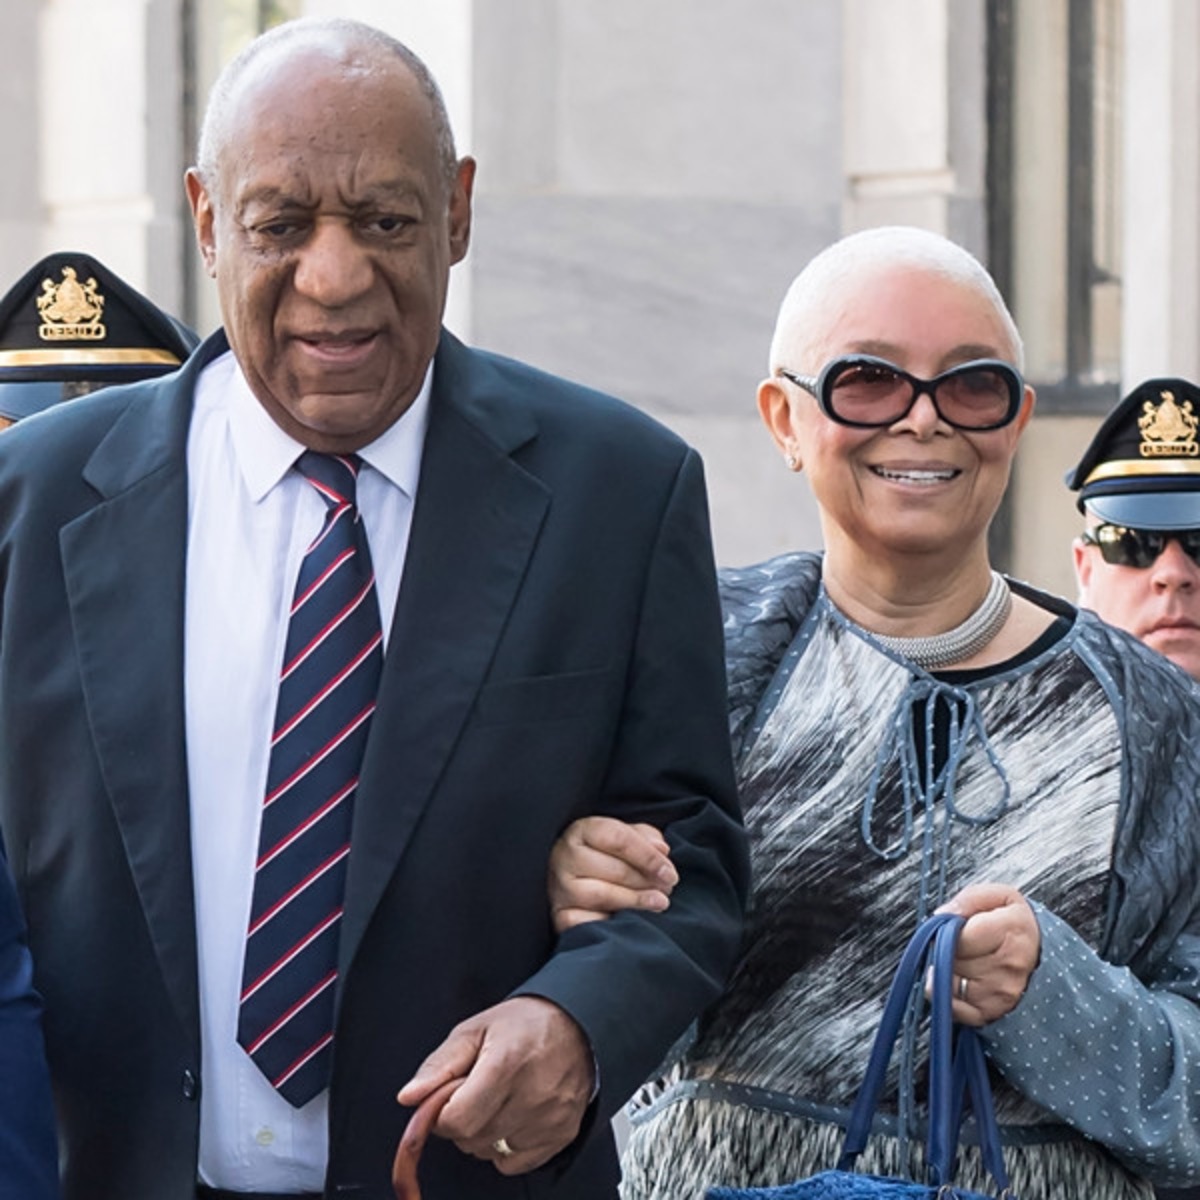 Bill Cosby’s wife, Camille Cosby, shuts down ‘hilarious’ divorce rumors